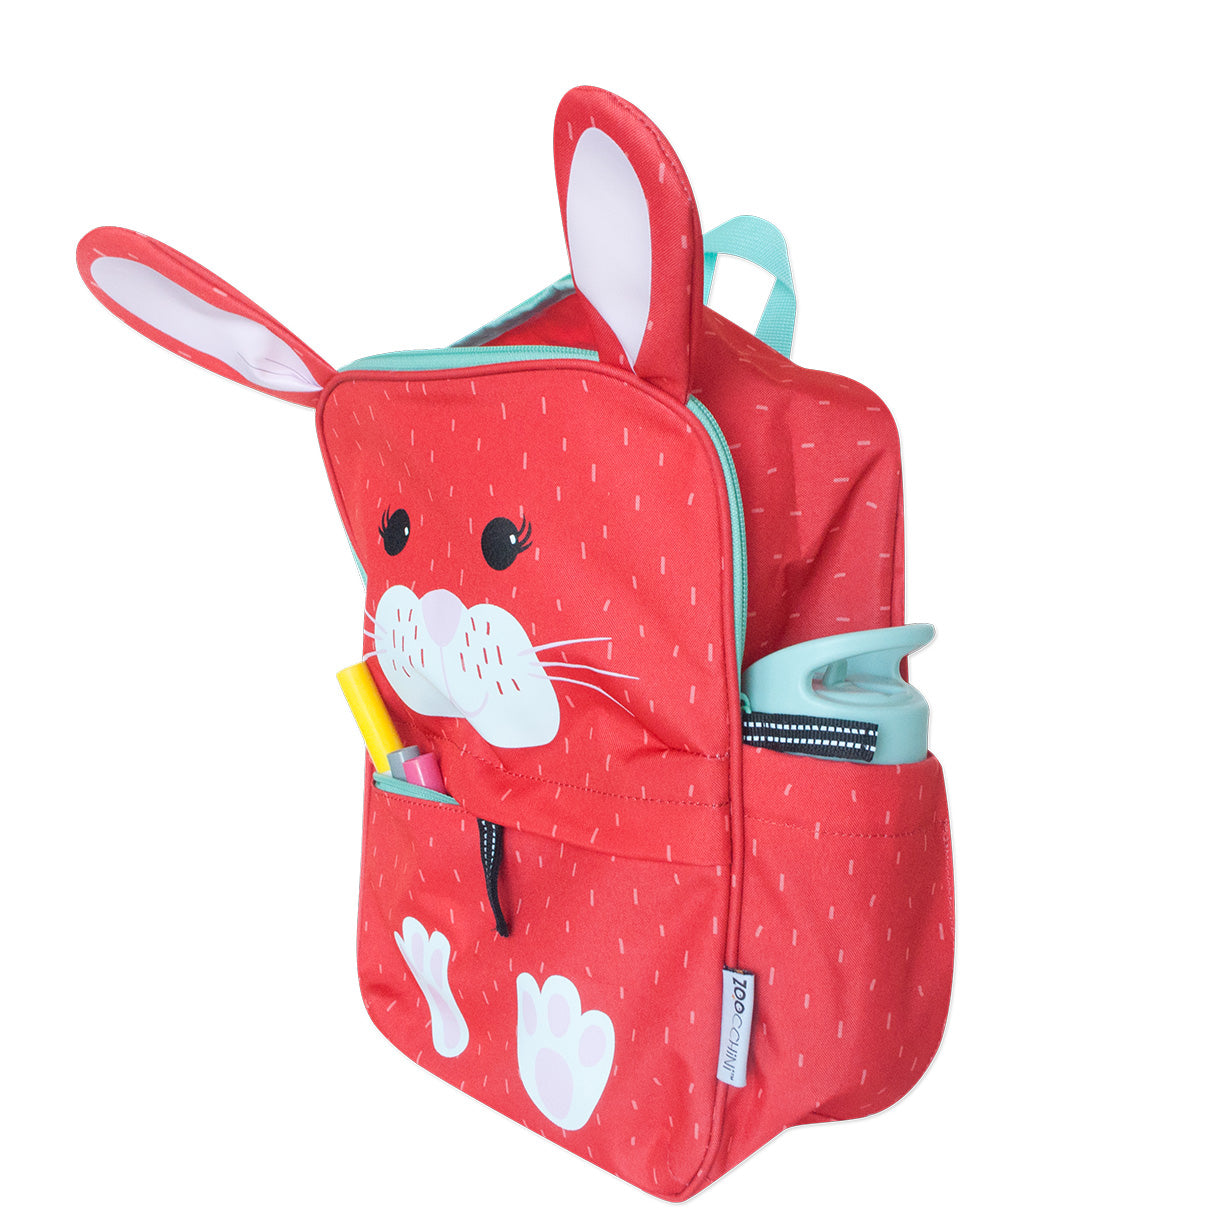 Toddler/Kids Everyday Square Backpack Bunny ZOOCCHINI the Bella - 